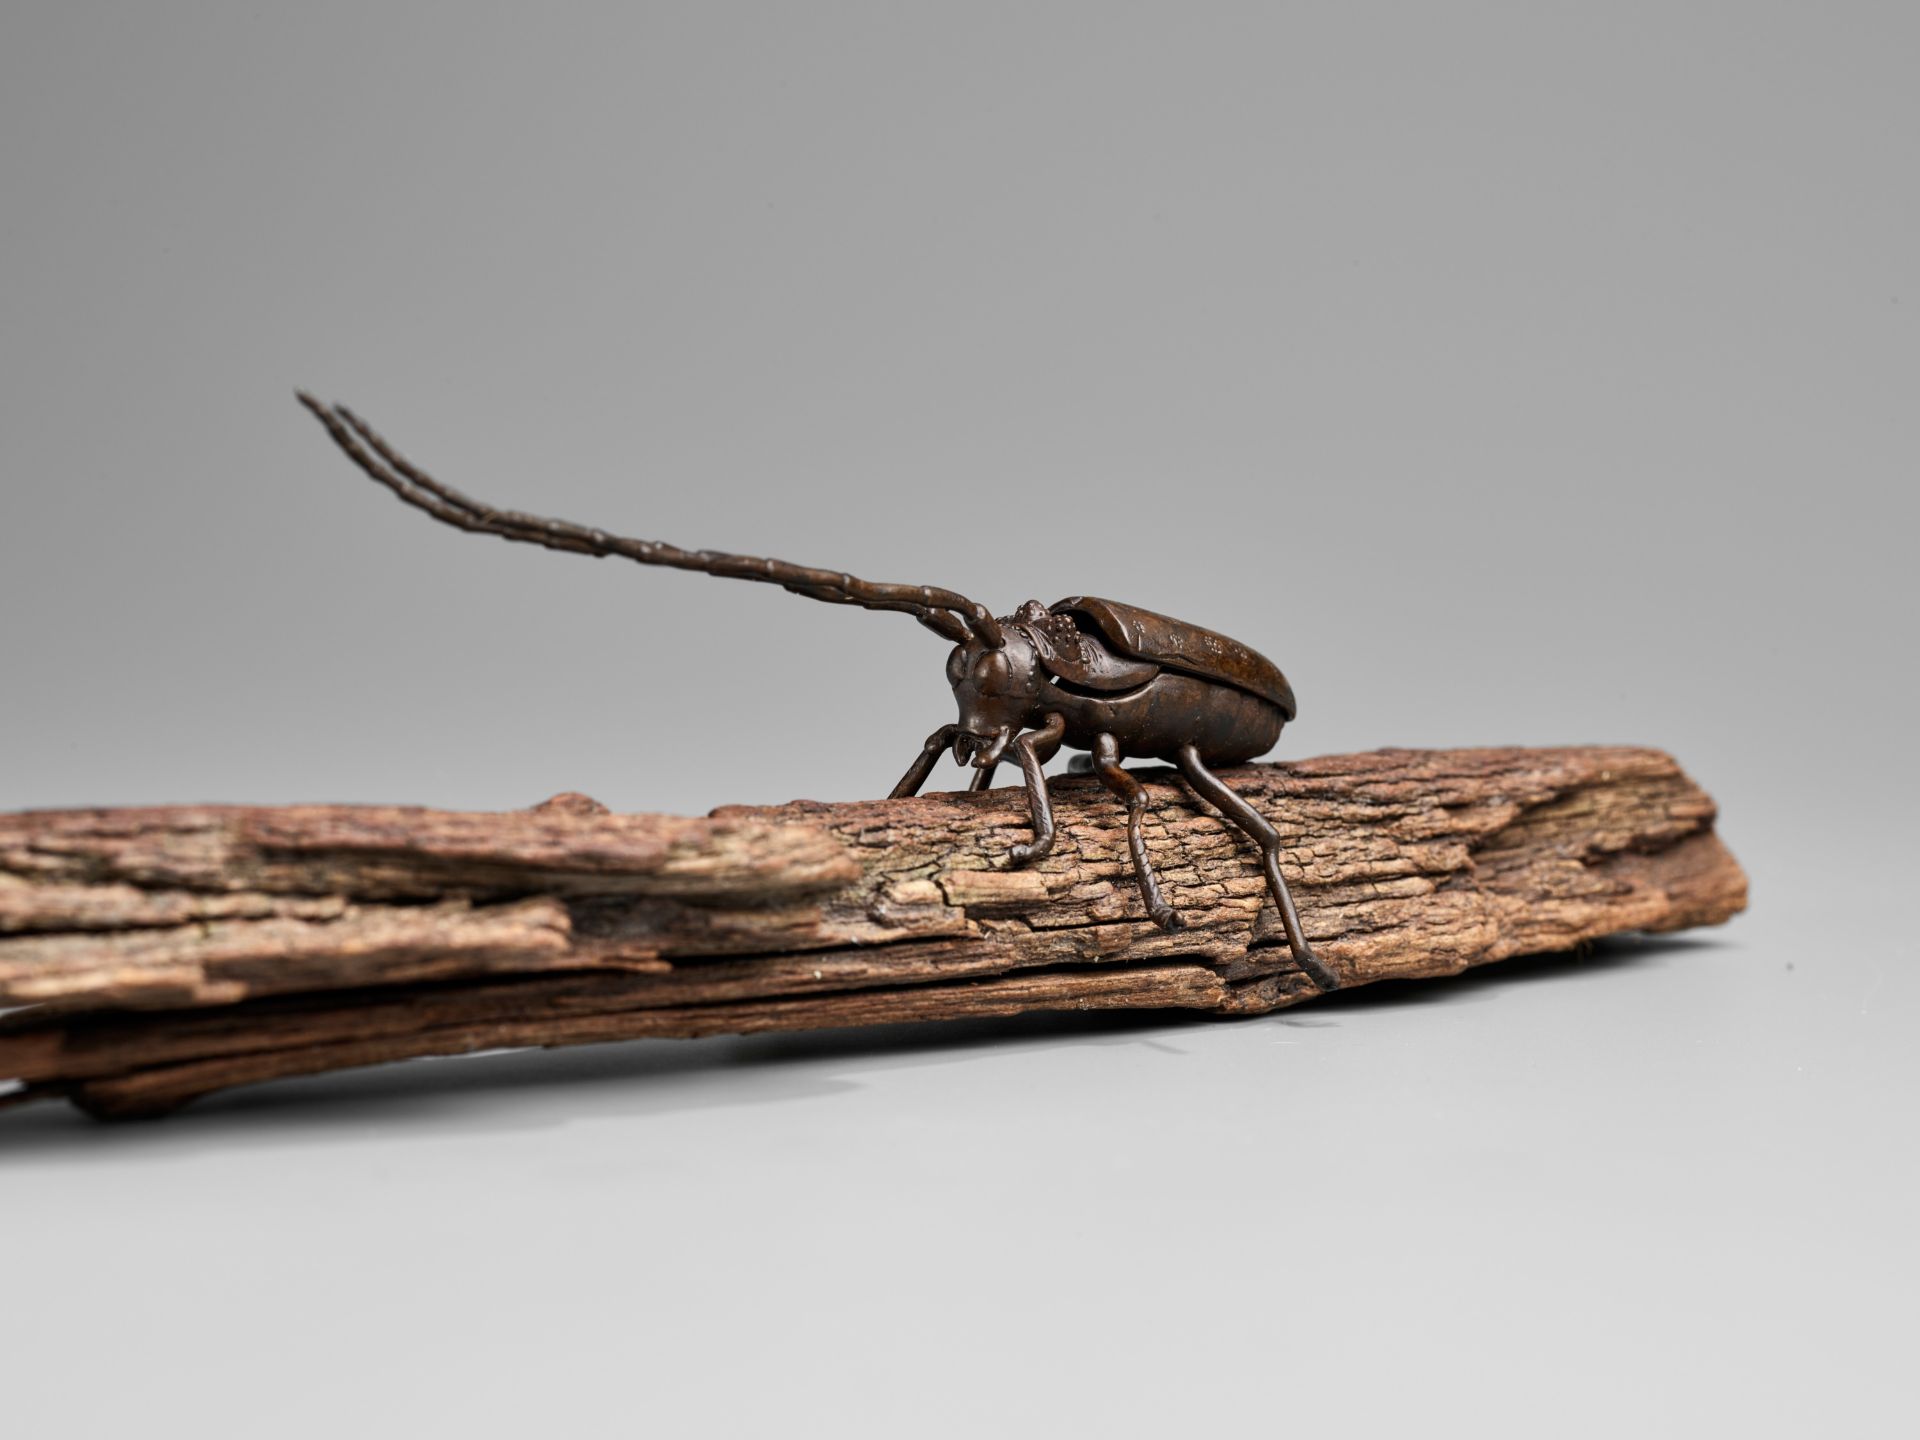 AN ARTICULATED BRONZE OKIMONO OF A SAWYER BEETLE CLIMBING A ROOTWOOD LOG - Image 2 of 9